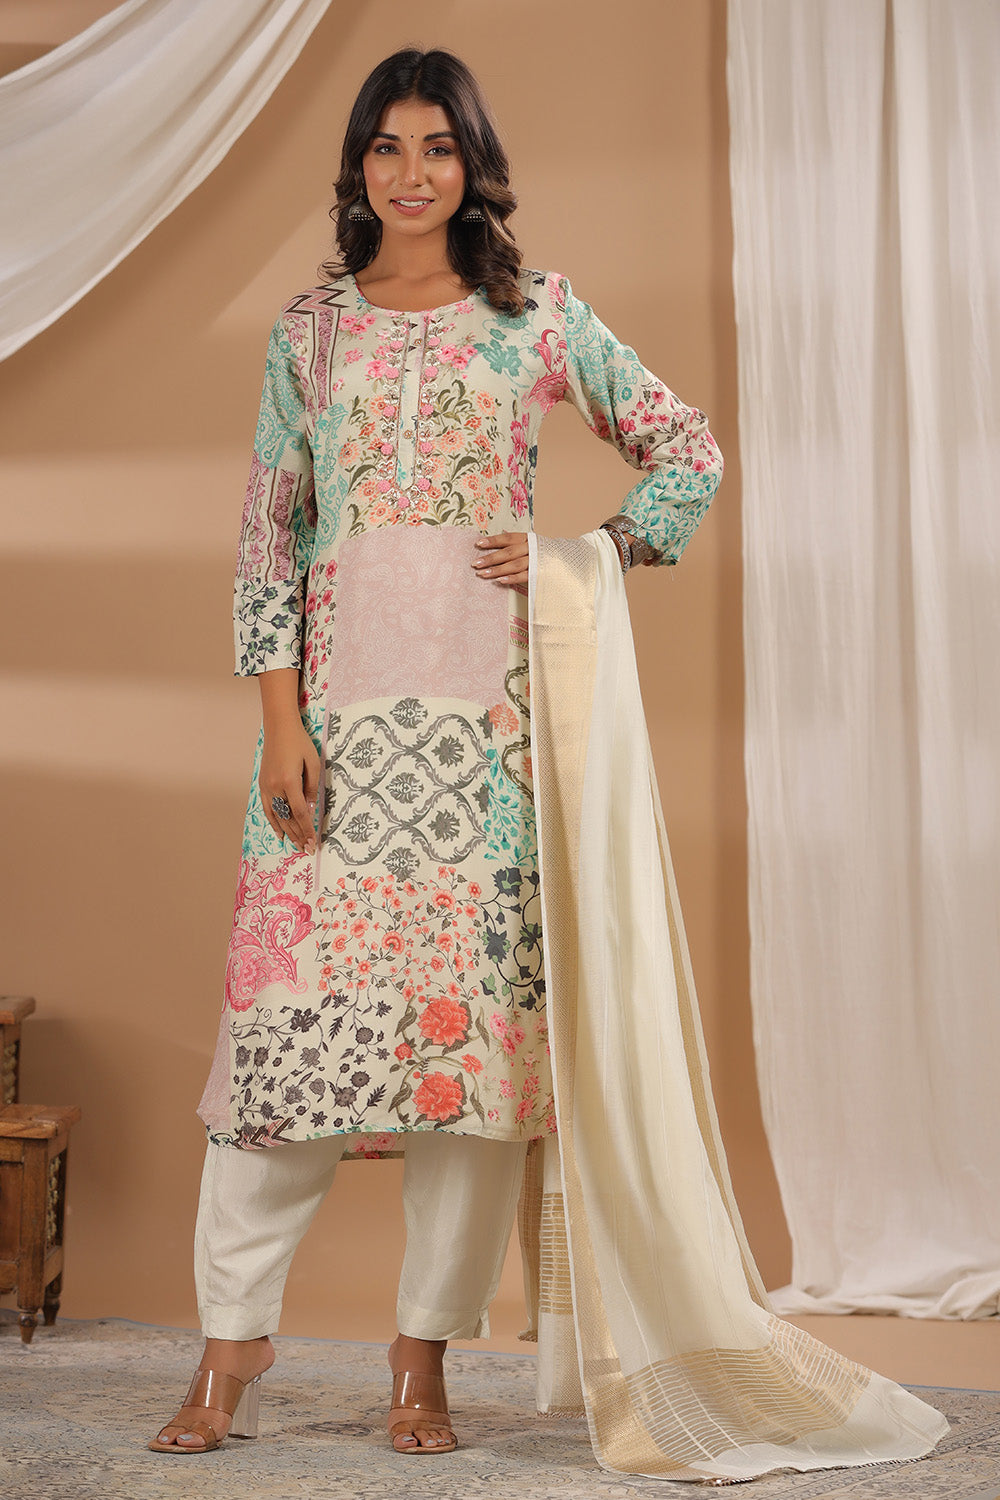 Cream Color Muslin Printed Straight Suit